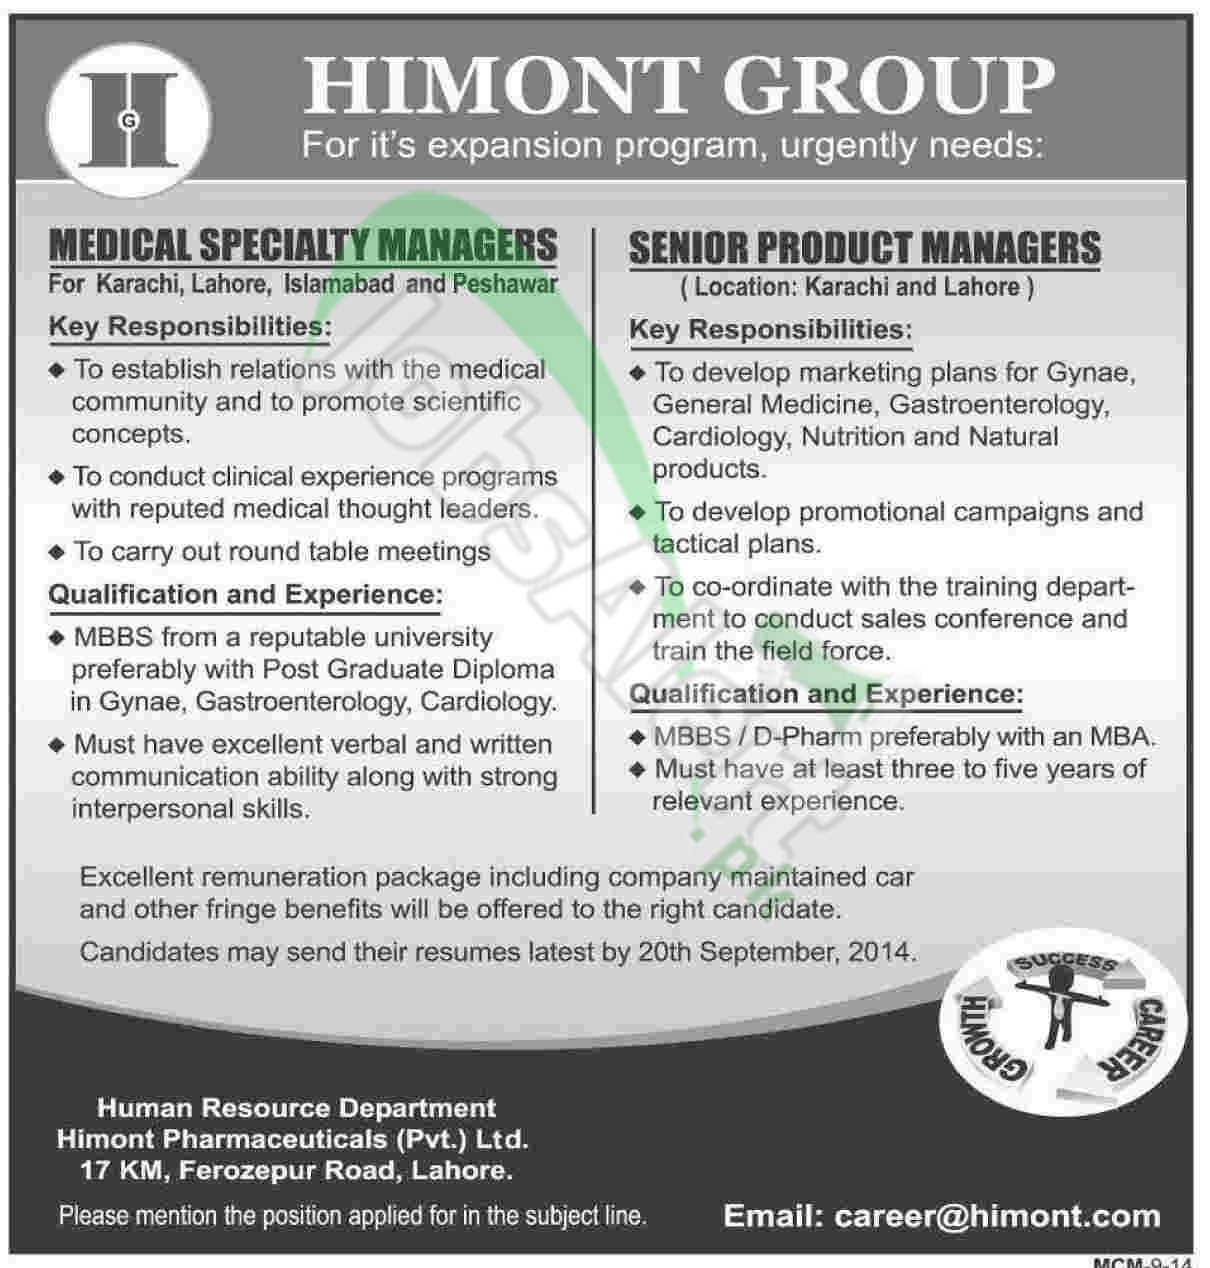 Himont Group